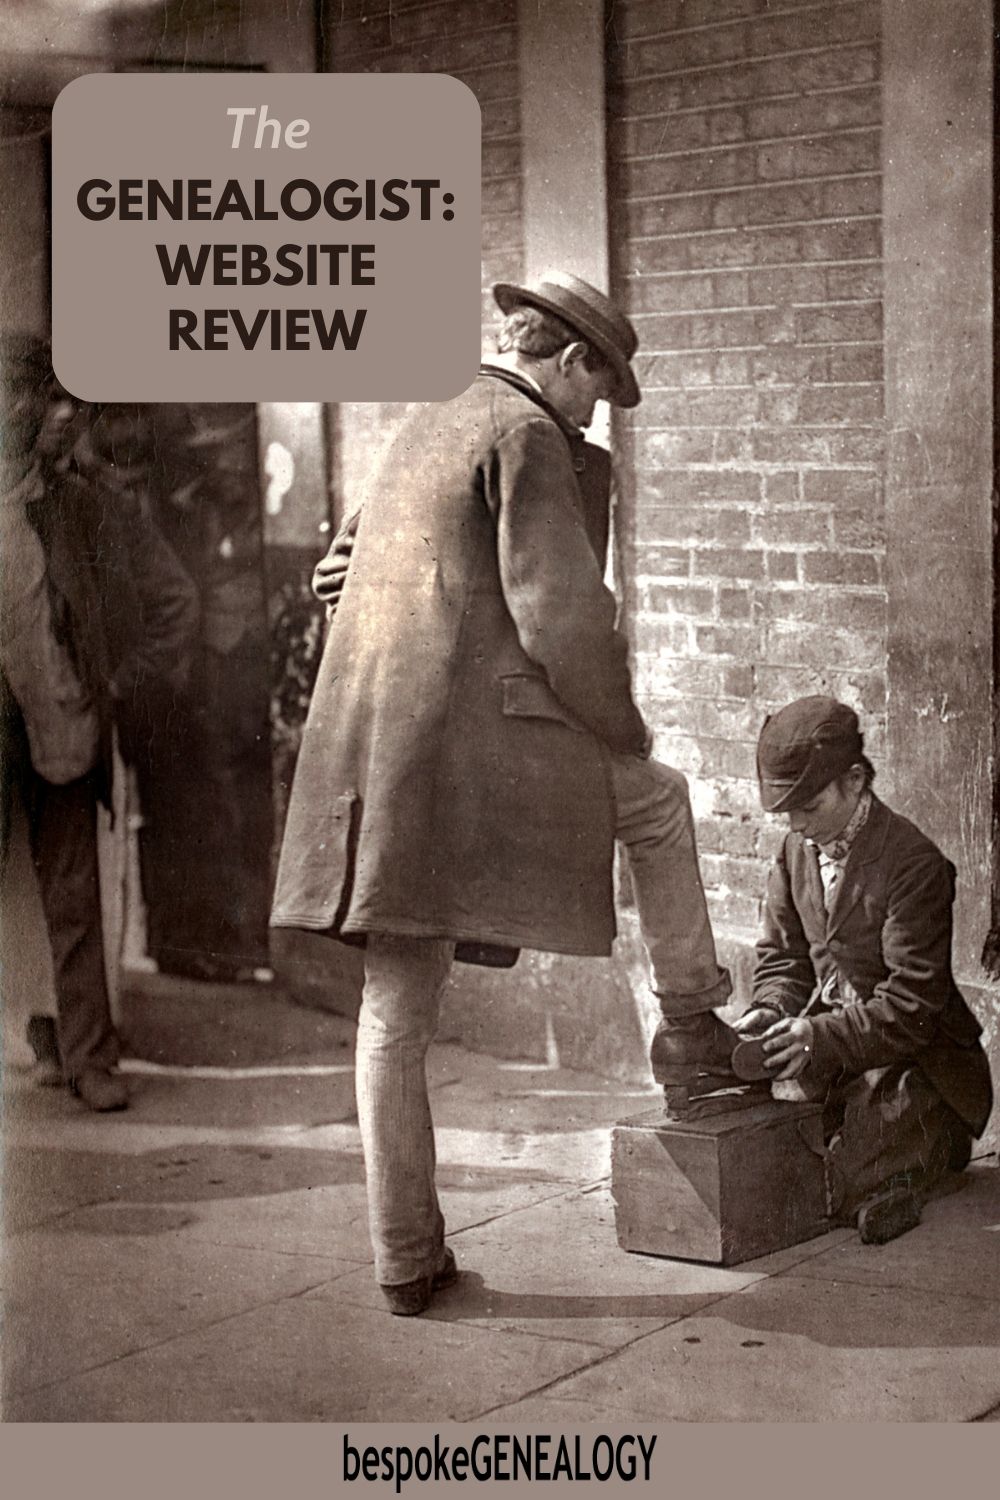 The Genealogist: Website review. Victorian photo of a man wearing a coat having his shoe polished by a young boy.